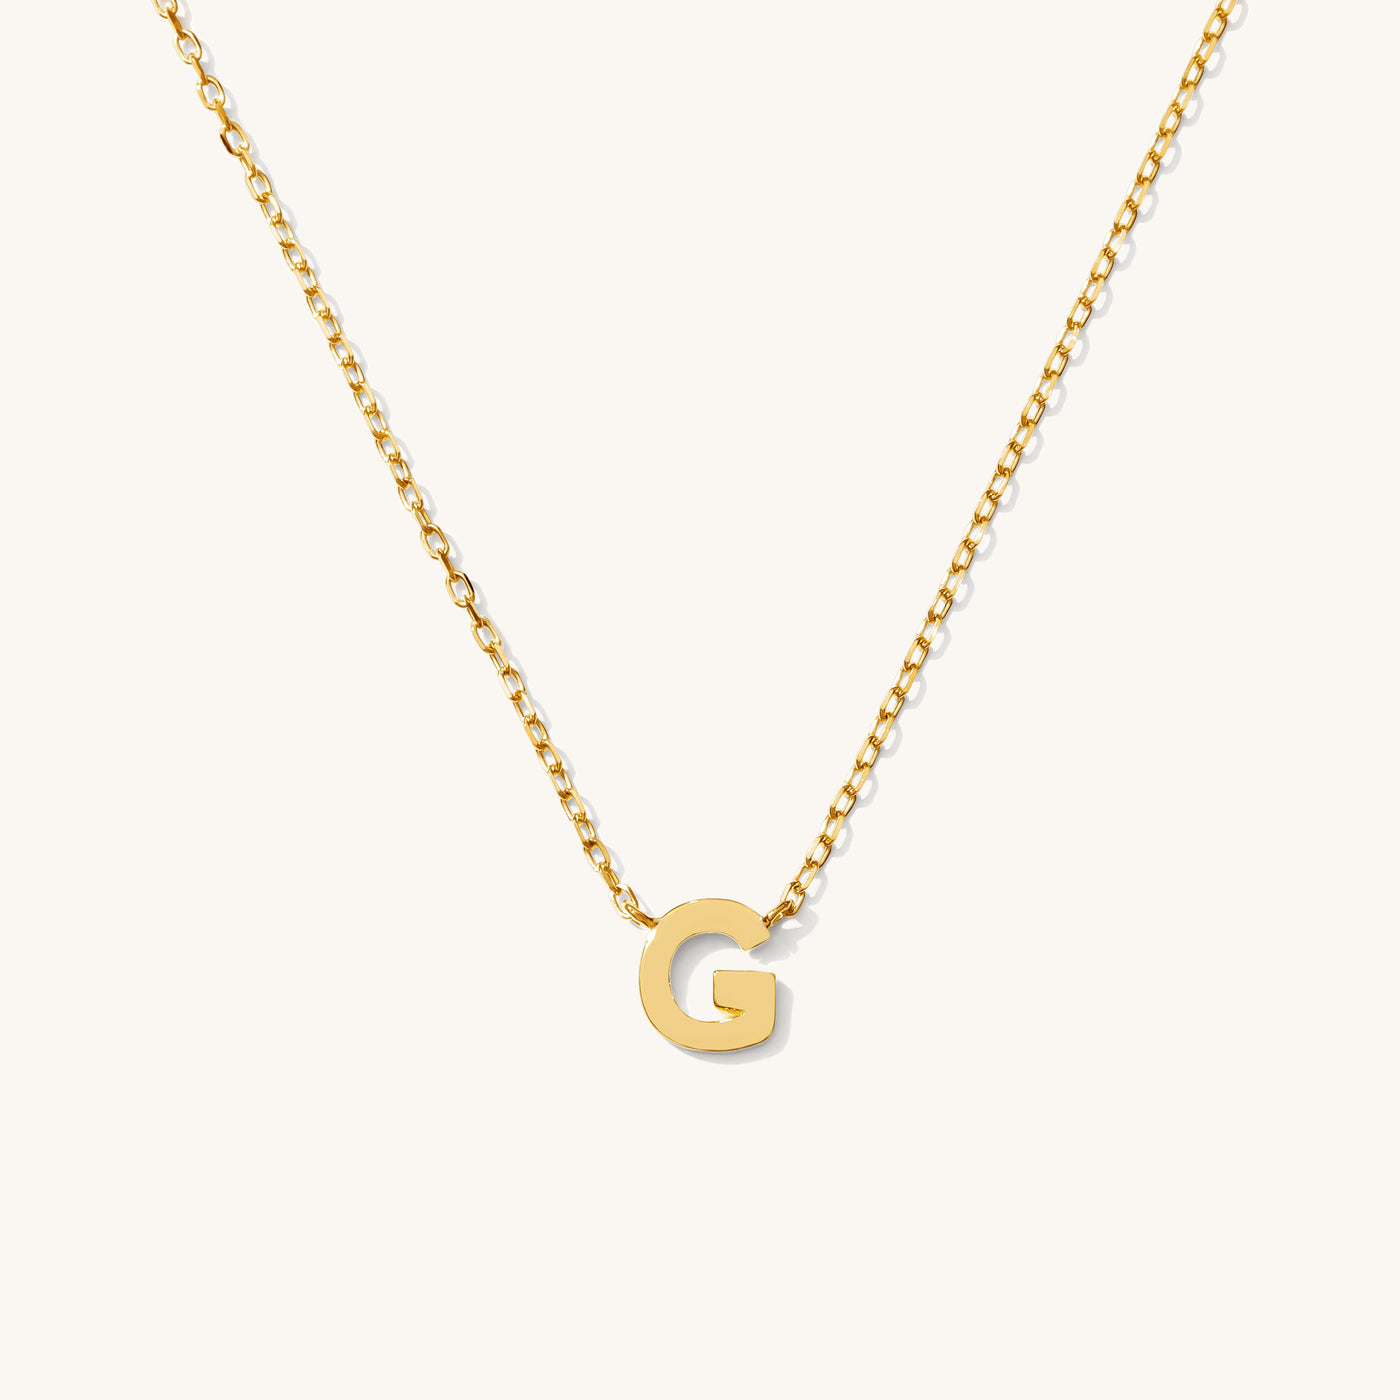 G Tiny Initial Necklace - 14k Solid Gold